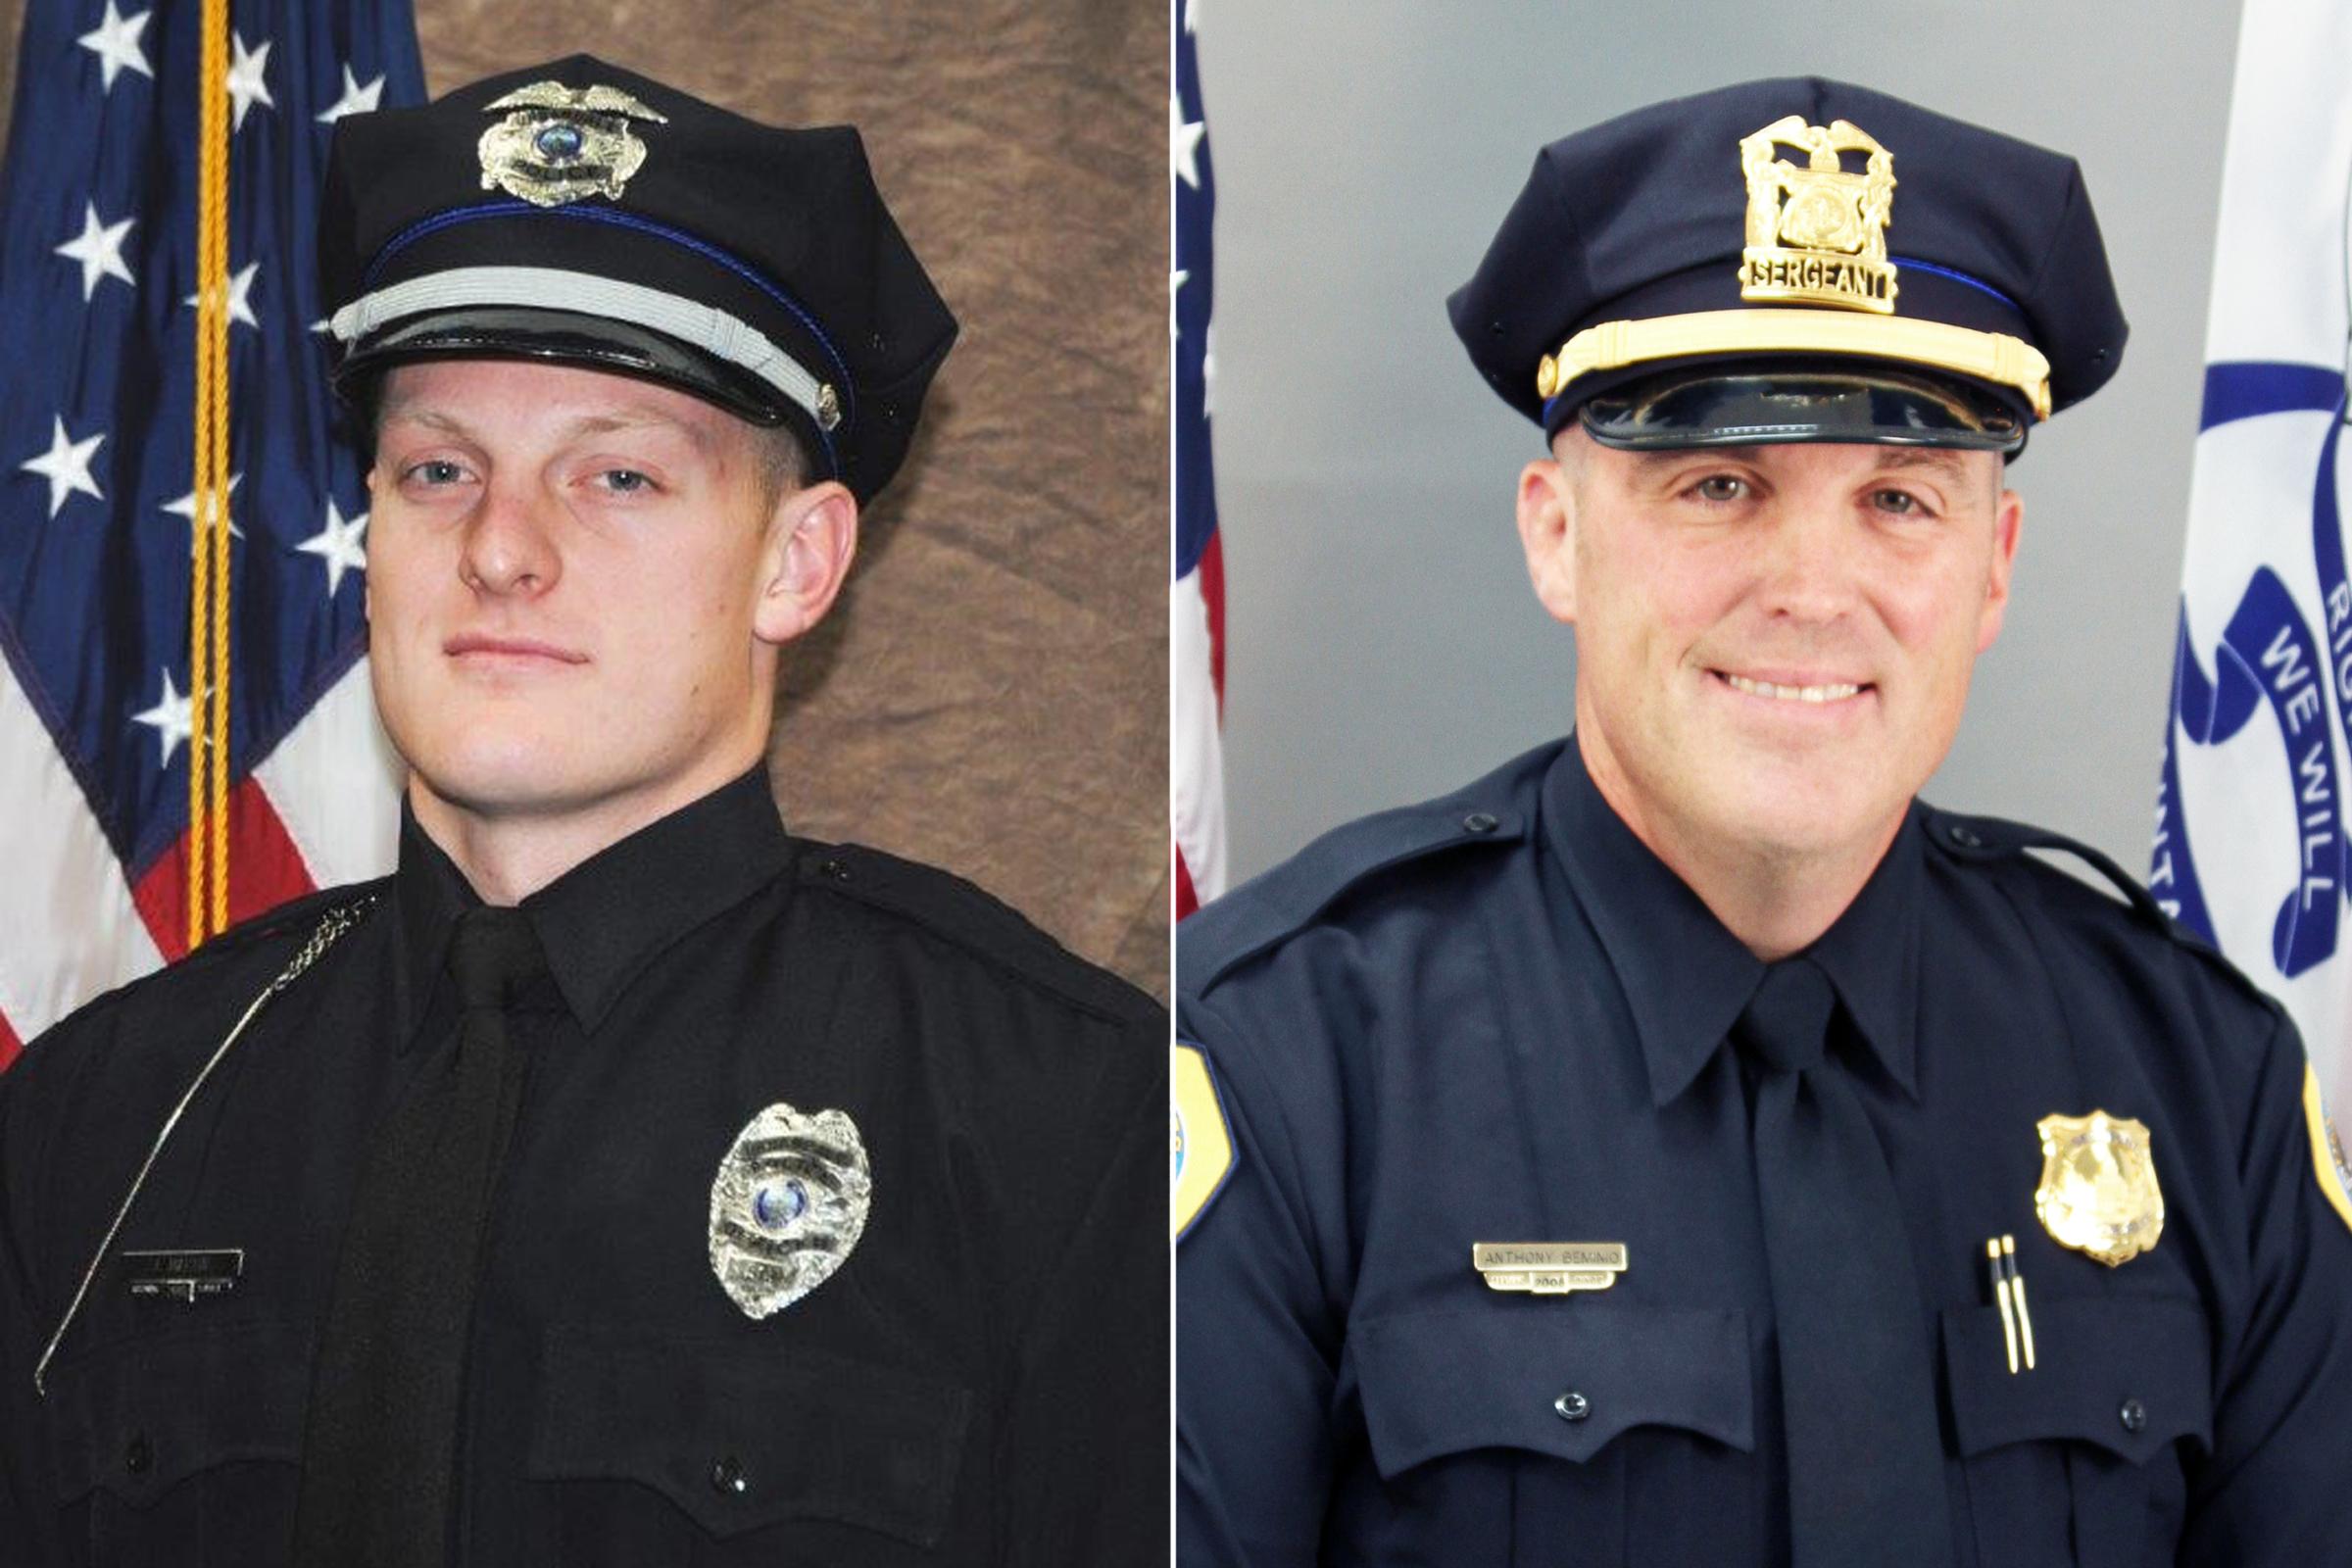 Urbandale police officer Justin Martin (l) and Sgt. Anthony “Tony” Beminio of the Des Moines police department (r) are pictured here.